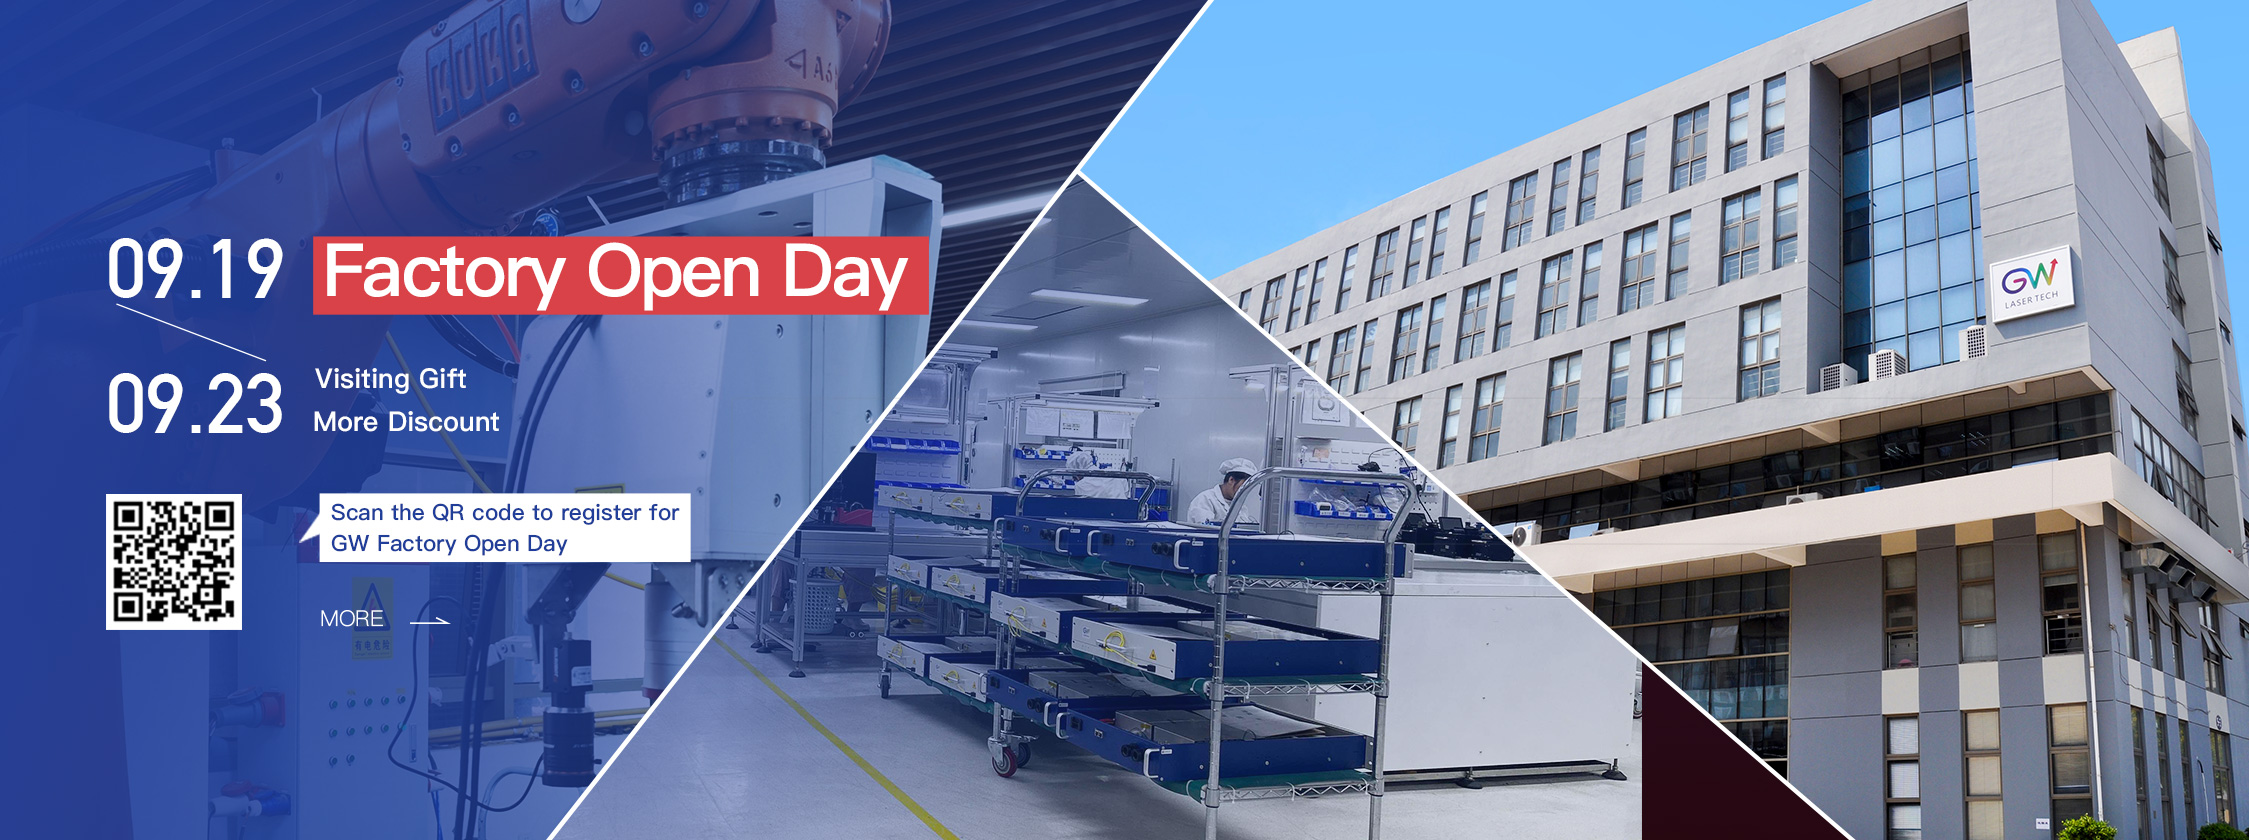 Continuing to shine, GW Laser invites you to The 23rd China International Industry Fair & Factory Open Day!